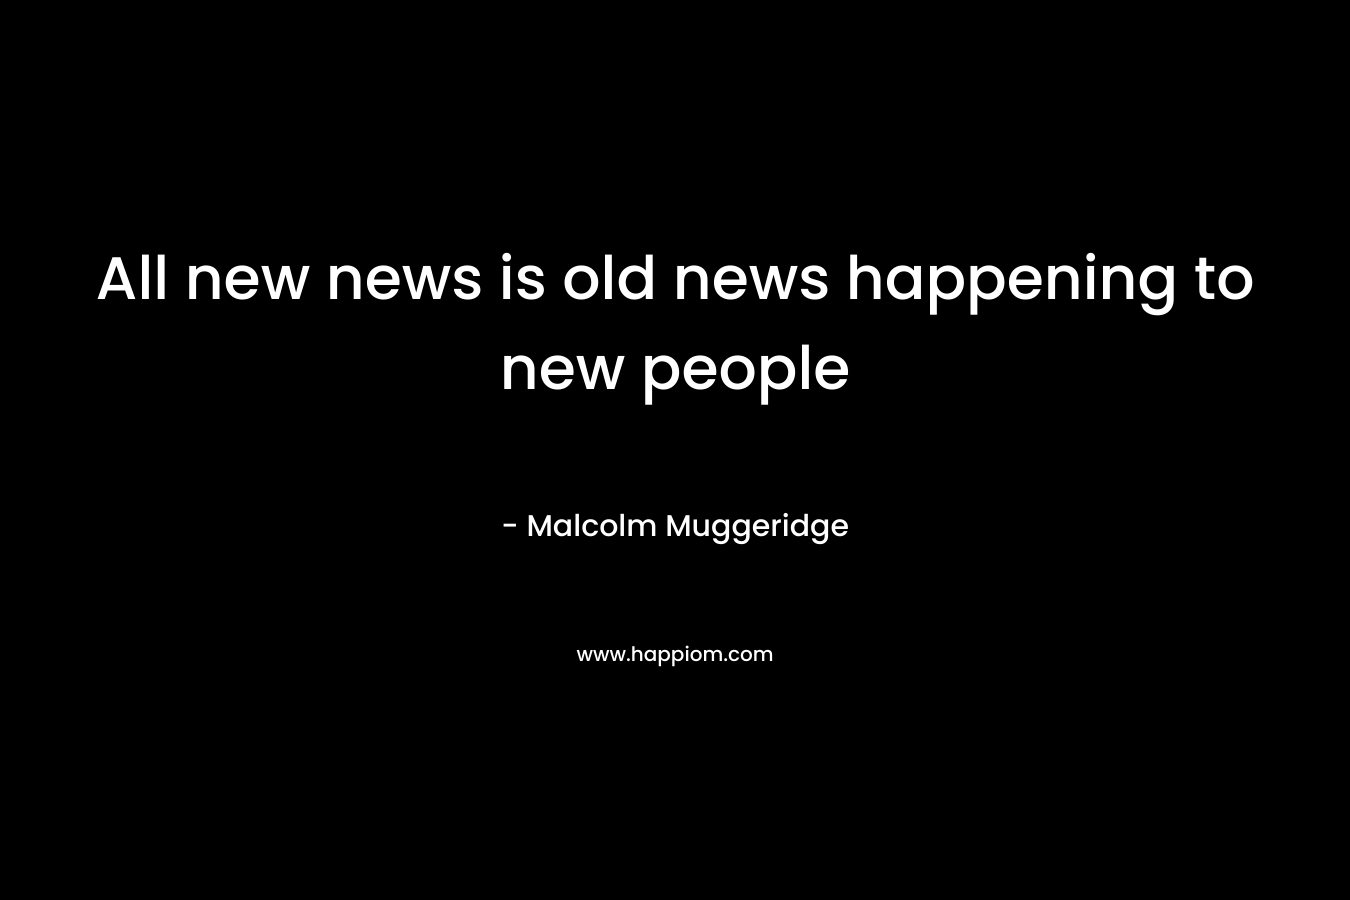 All new news is old news happening to new people